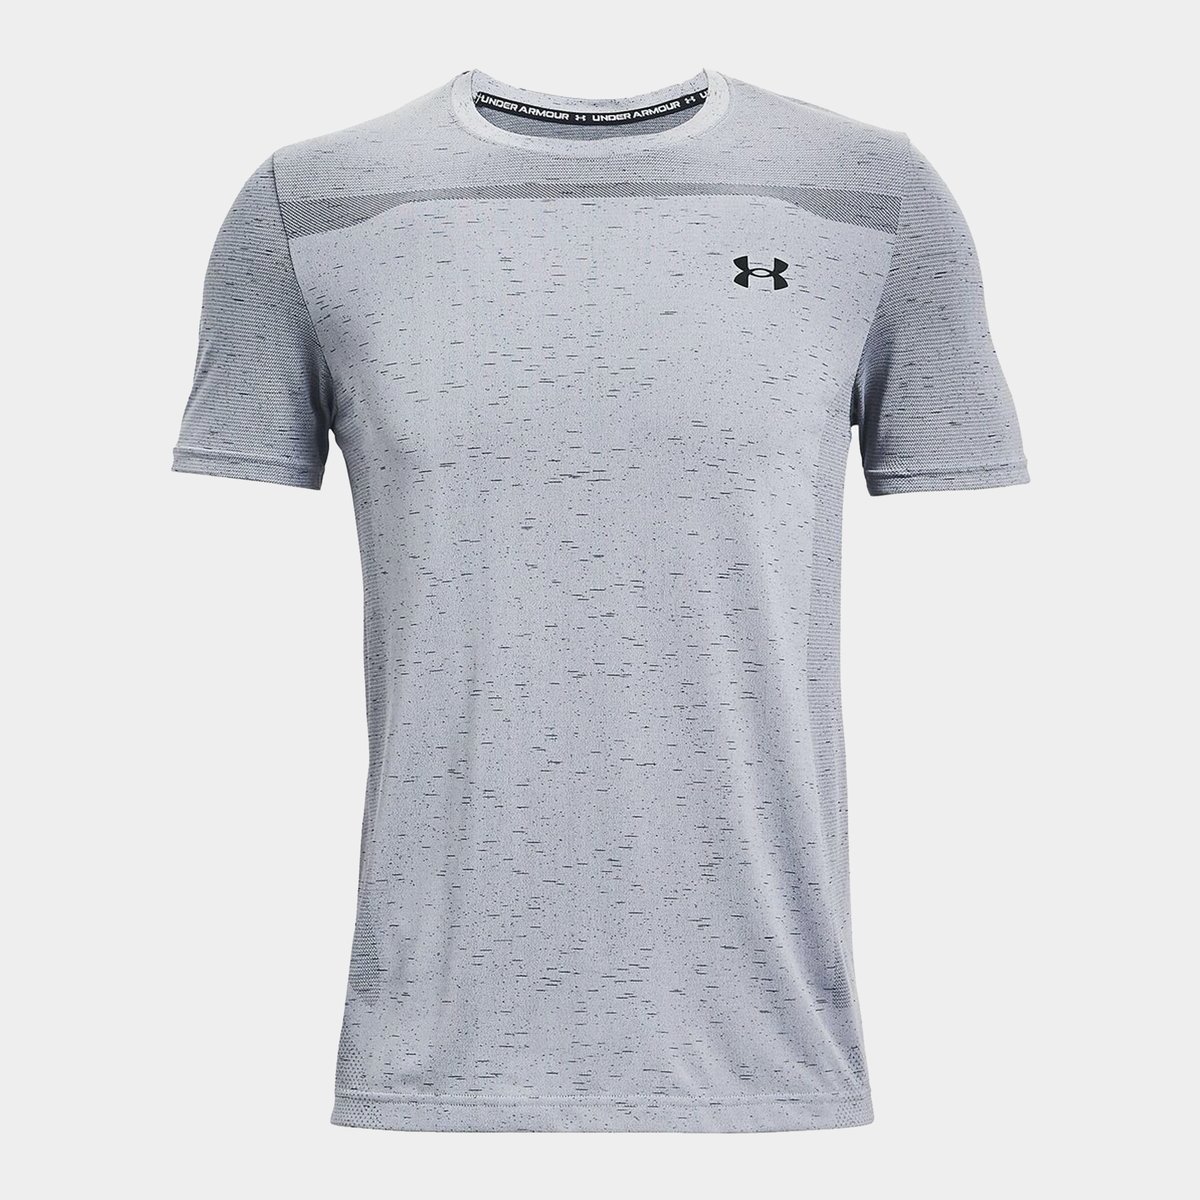 Under Armour, SS Seamless T Sn99, Short Sleeve Performance T-Shirts